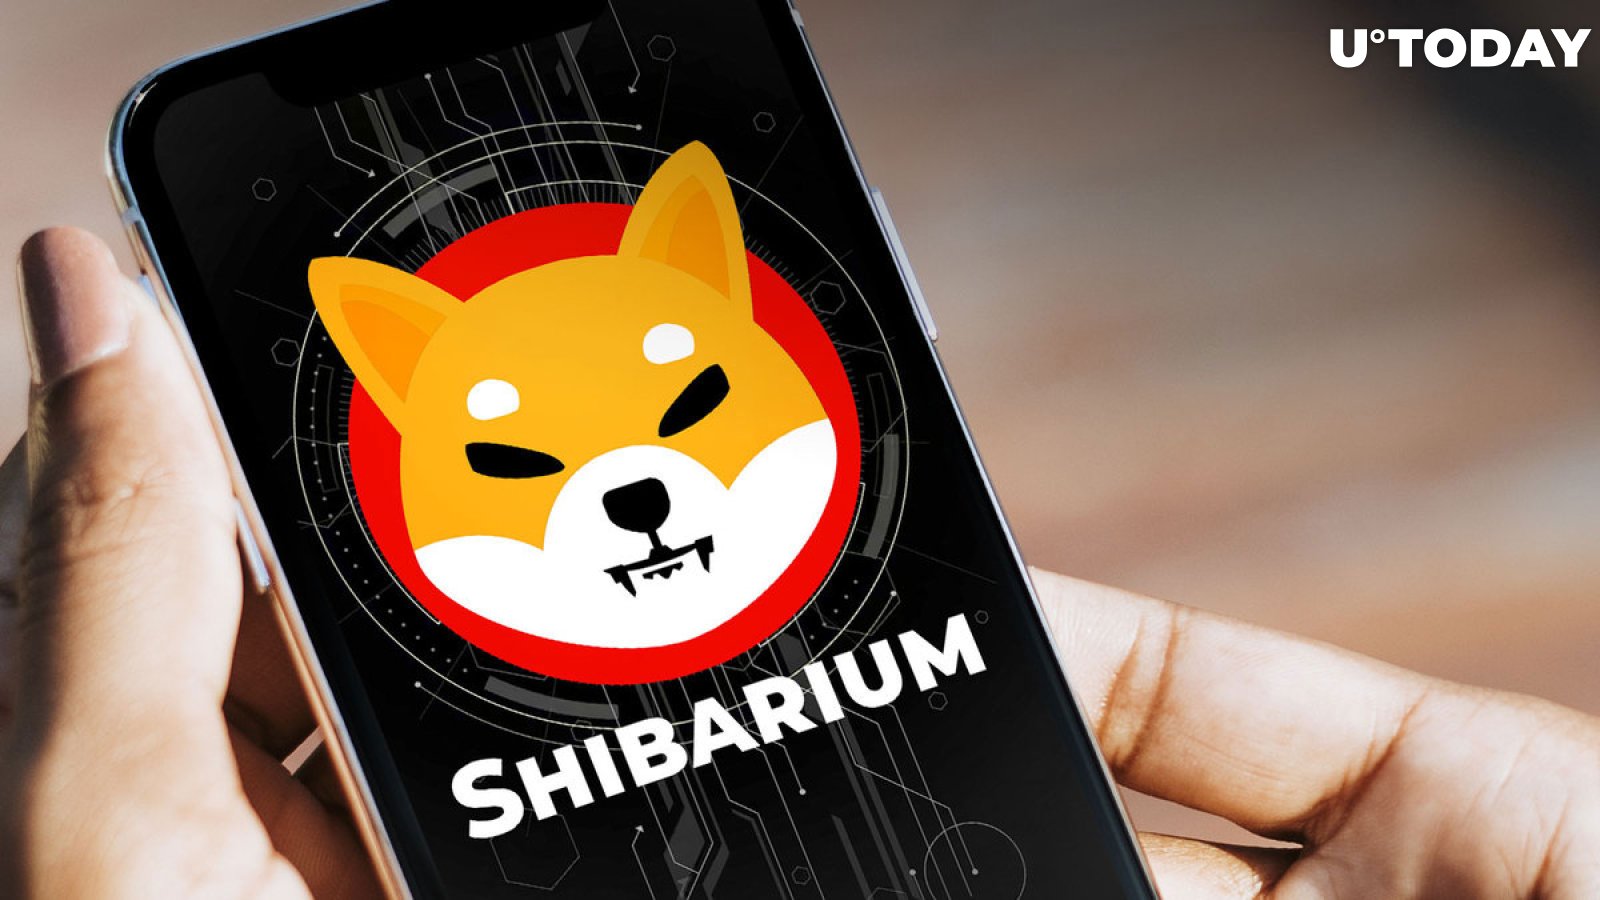 SHI Stablecoin Not Deployed Yet, Shibarium Admin Says, Cooling off SHIB Army's Expectations